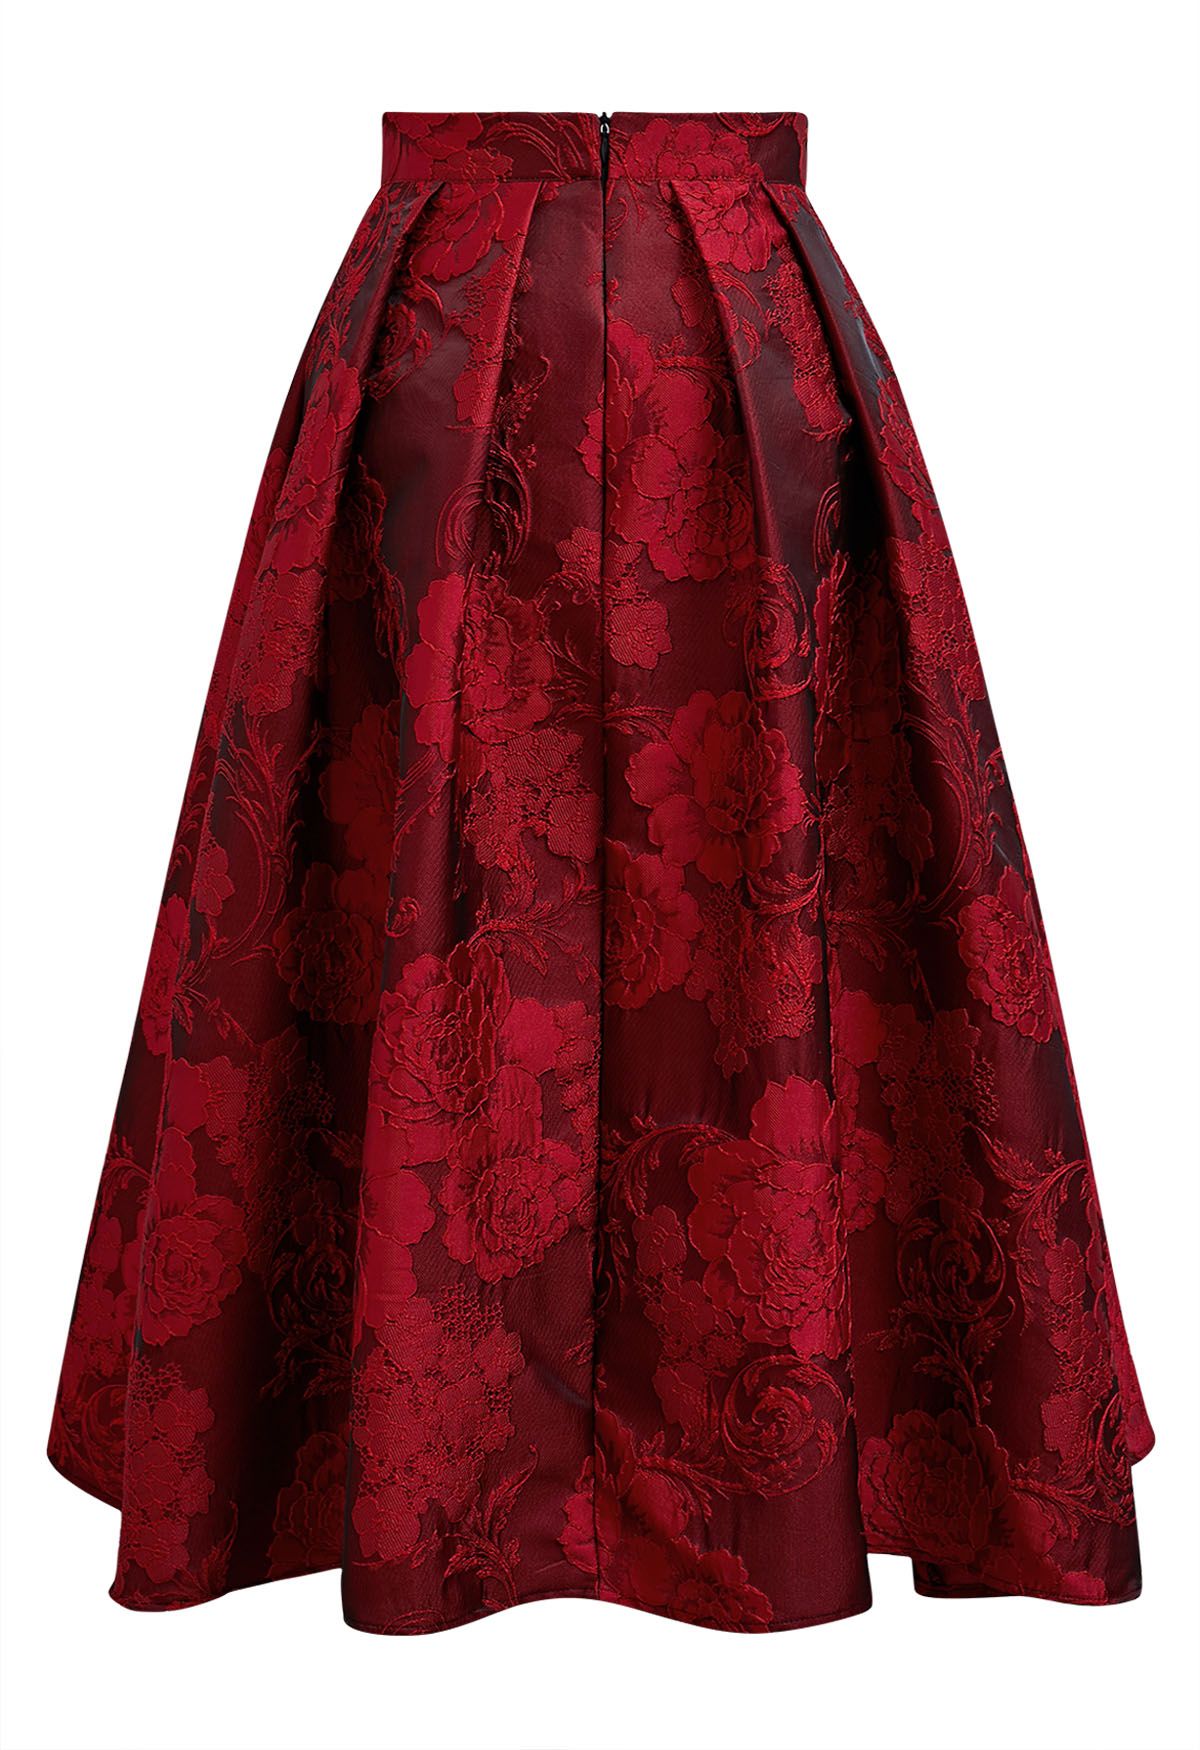 Blissful Red Floral Jacquard Pleated Midi Skirt